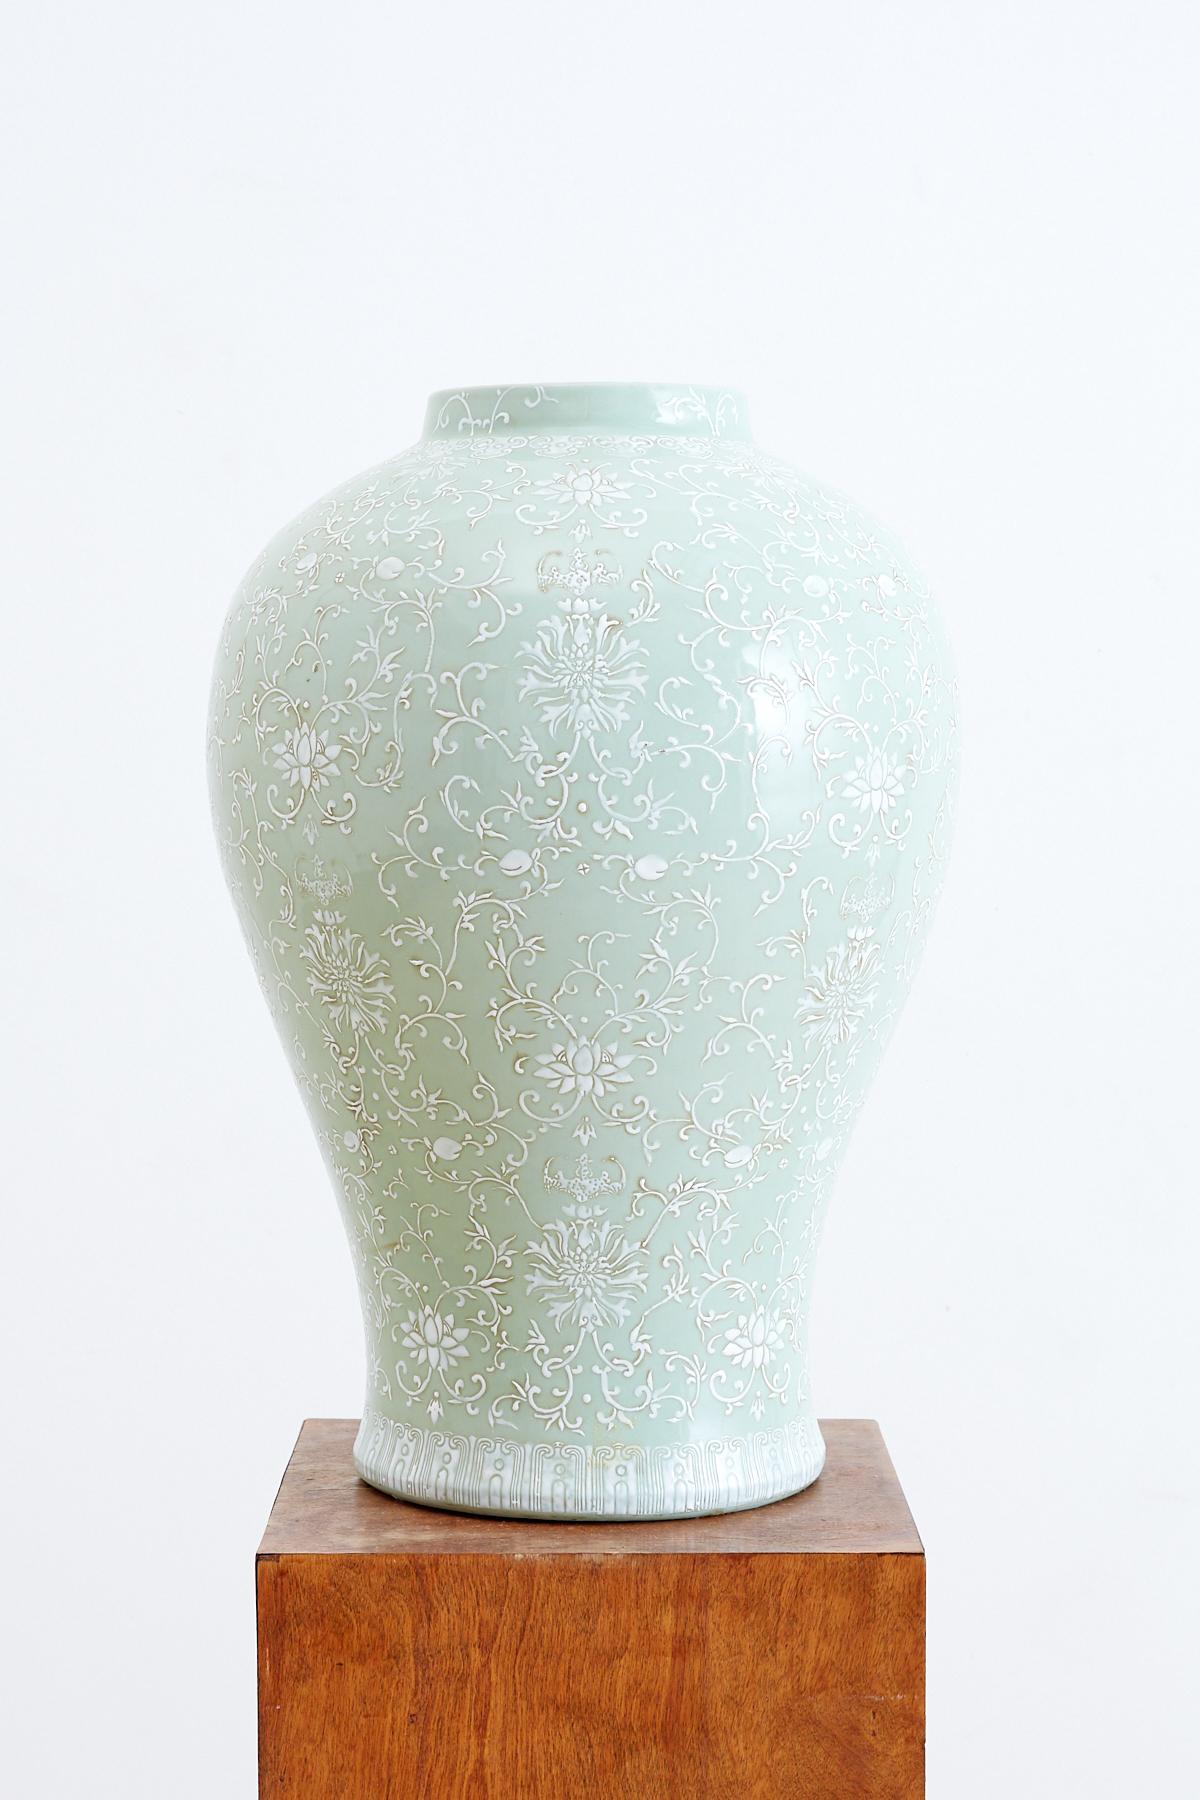 Monumental celadon glazed ginger jar form vase featuring a moriage or dragon ware decoration. Nearly 15 inches wide and 25 inches tall this large jar has a unique raised white floral and foliate decoration. Beautiful intricate patterns run